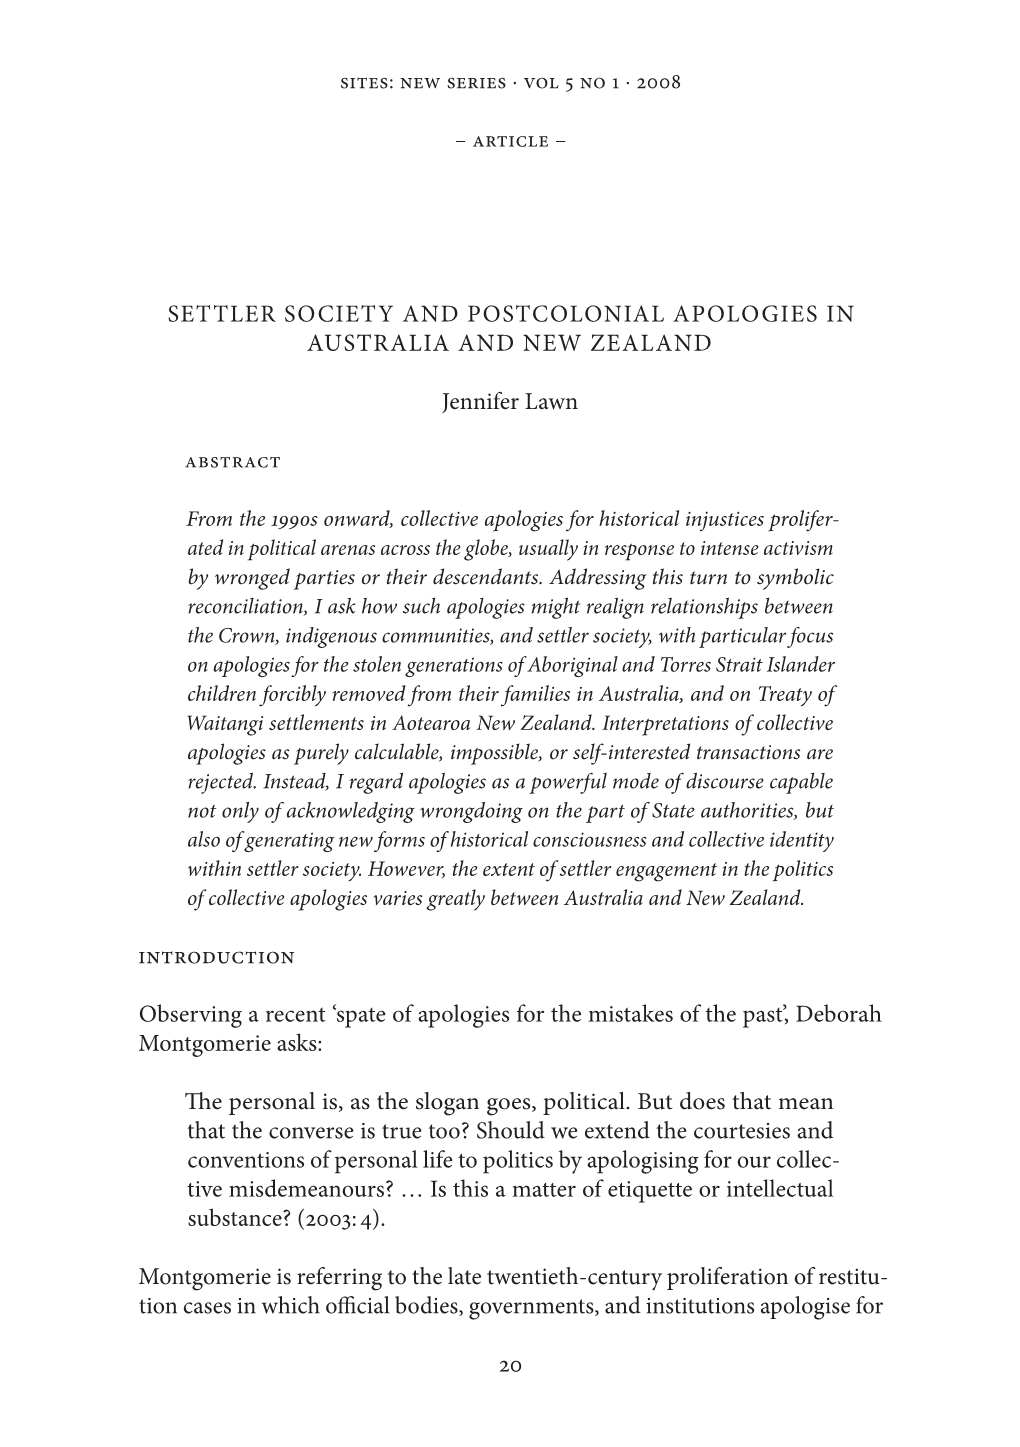 20 Settler Society and Postcolonial Apologies in Australia and New